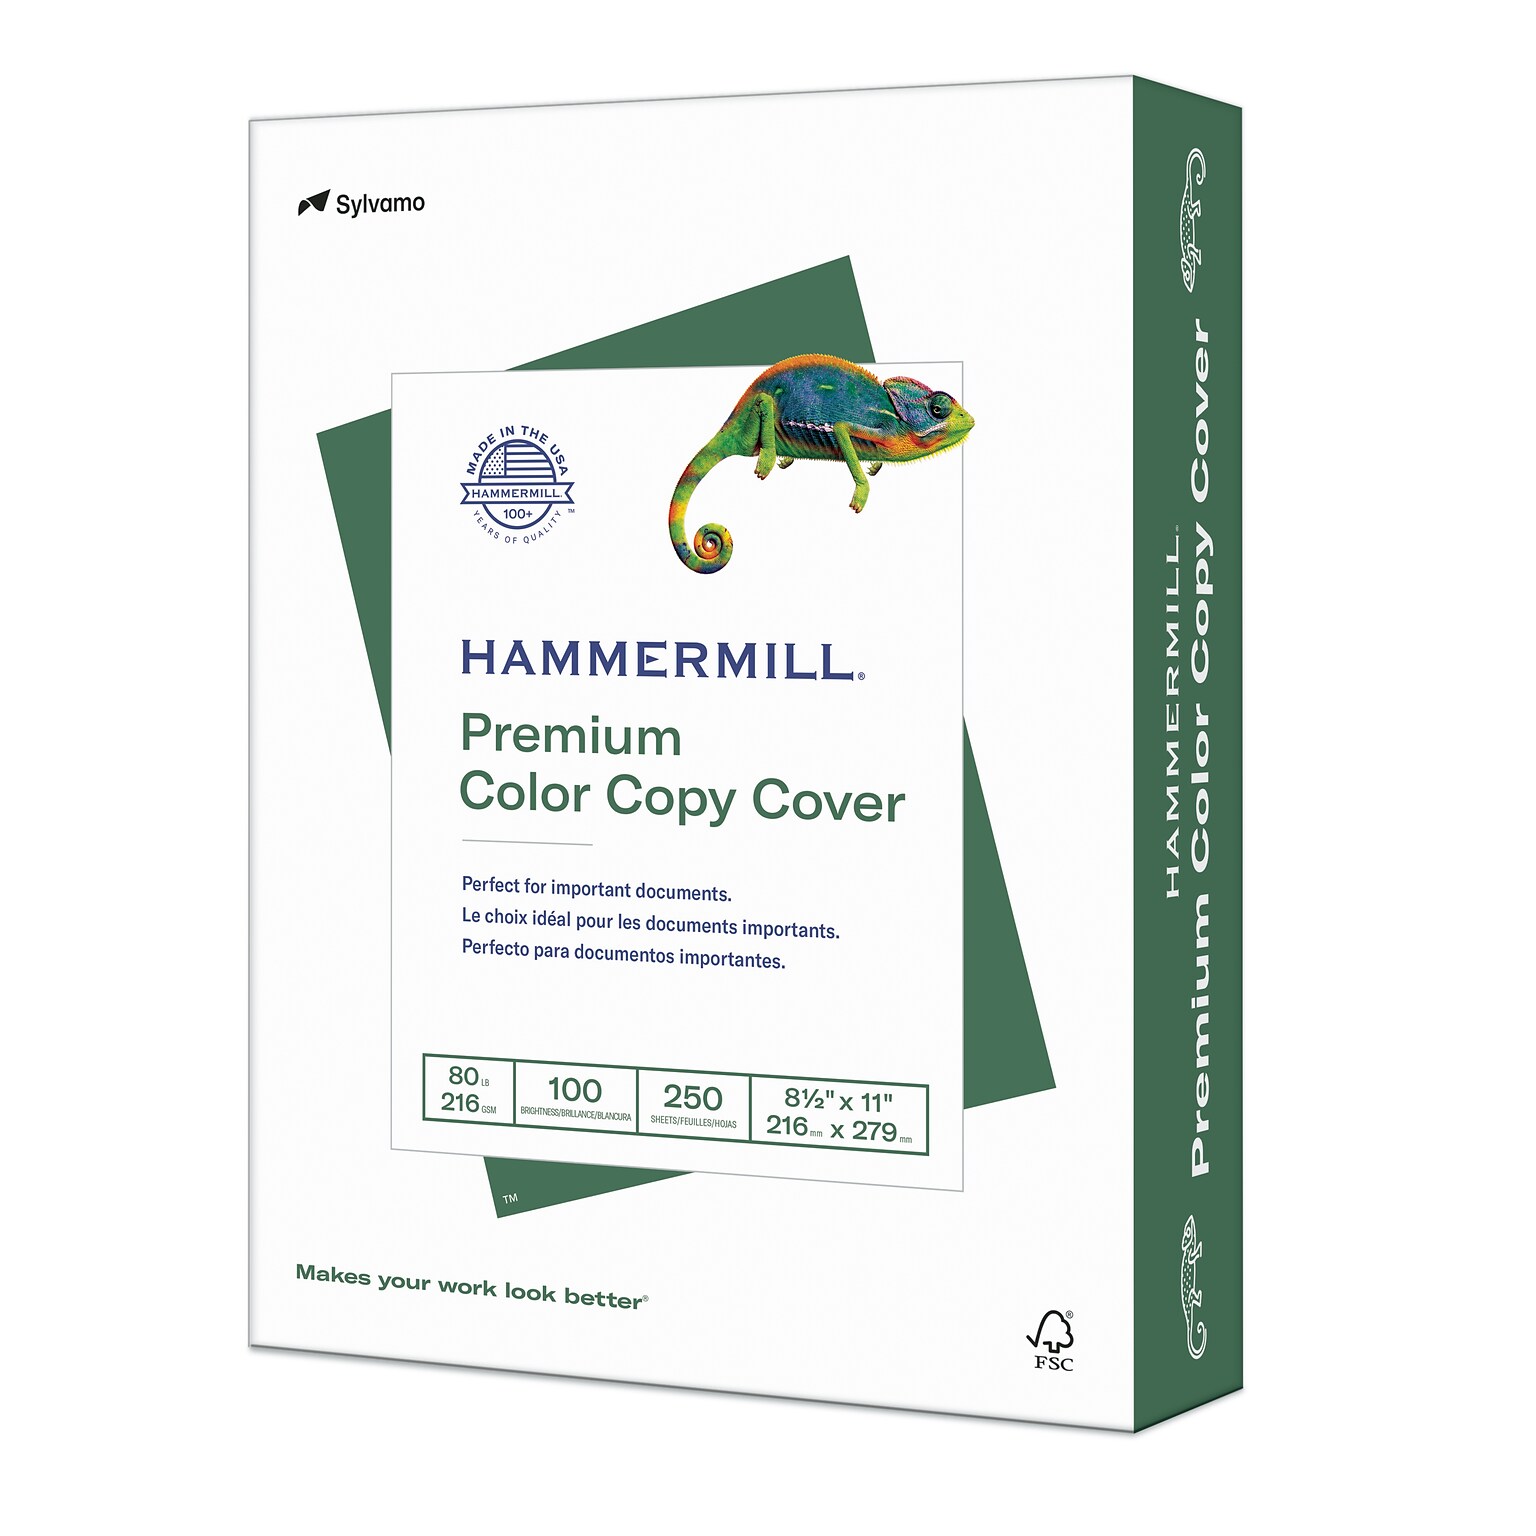 Hammermill Premium Color Copy 80 lbs. Cover Paper, 8.5 x 11, White, 250 Sheets/Ream (120023)